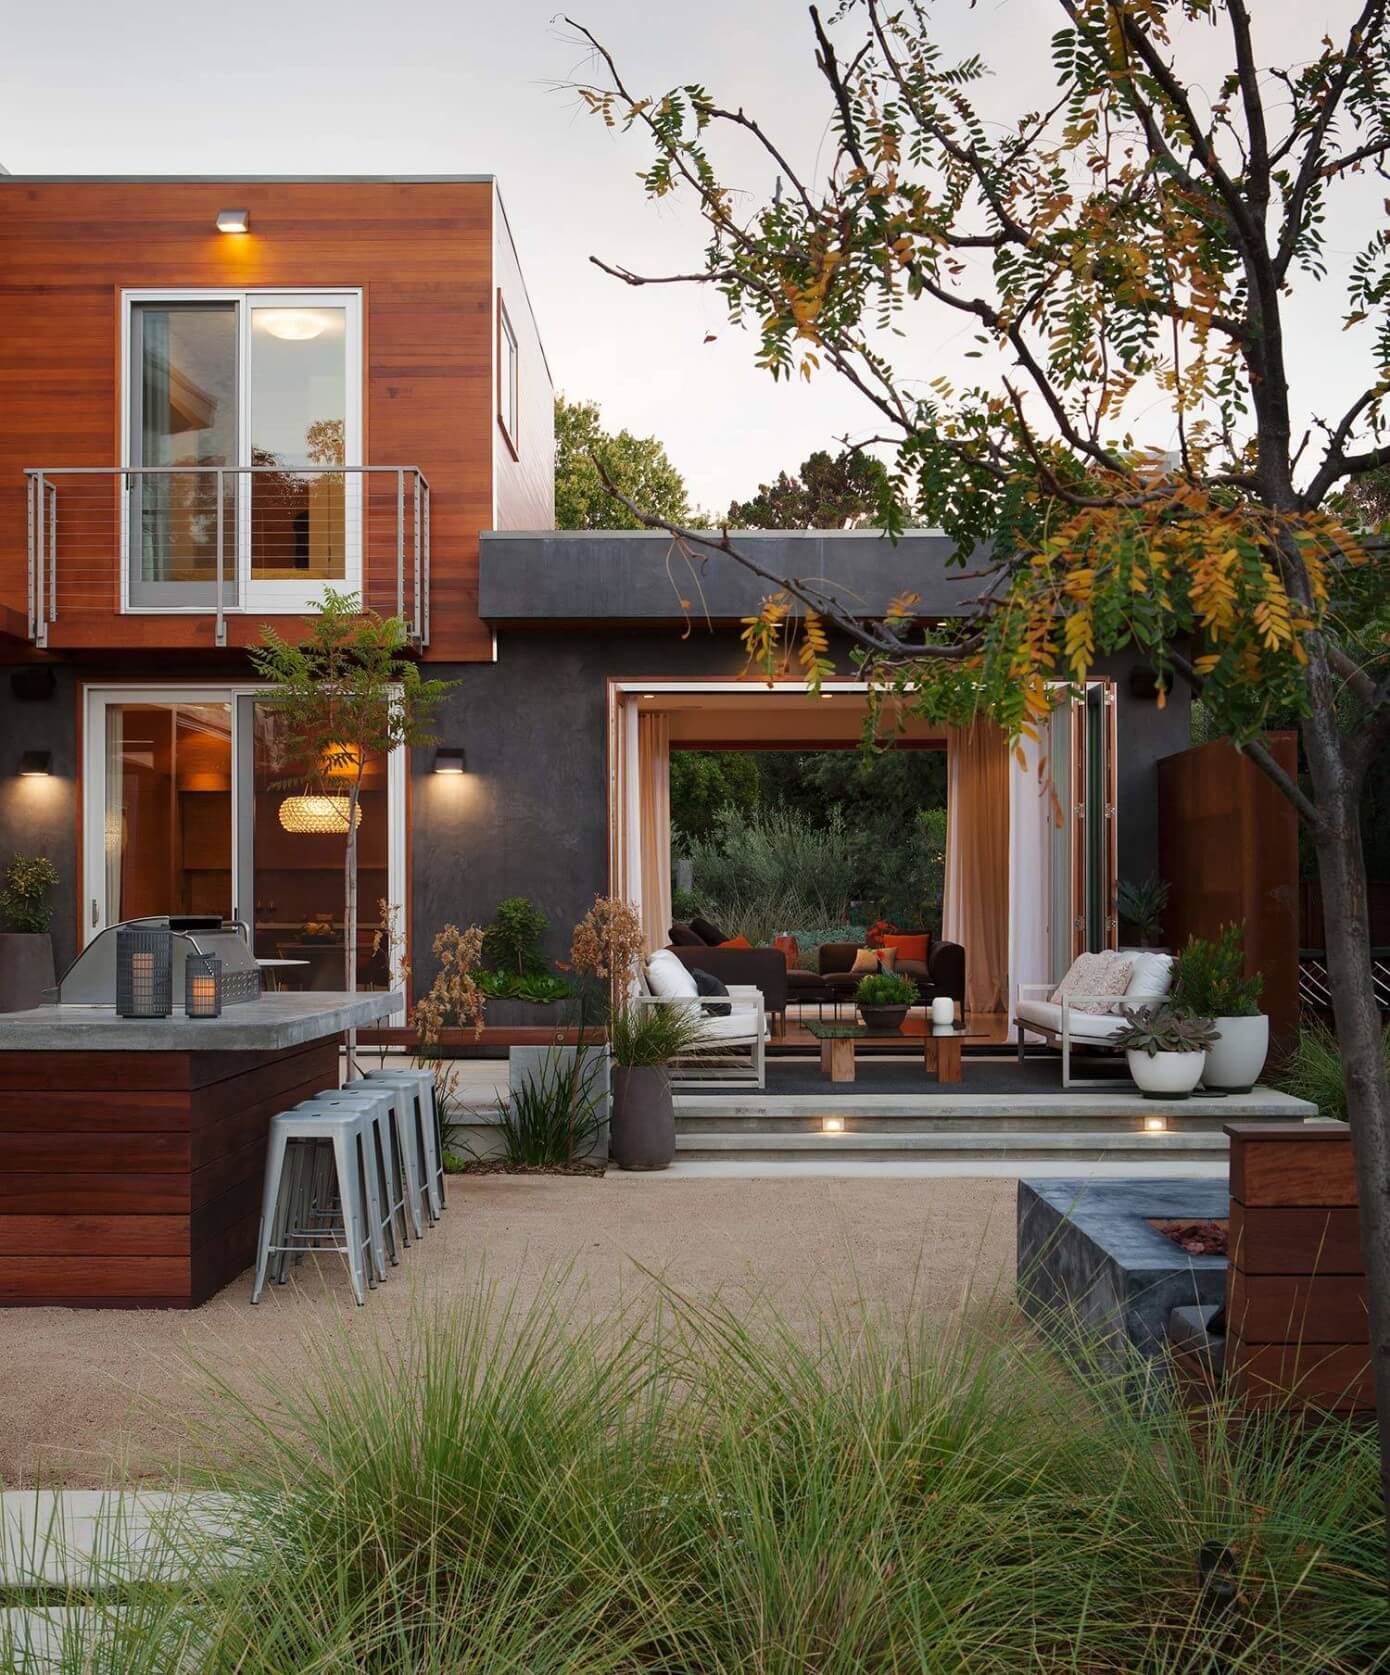 Los Altos House by Dotter Solfjeld Architecture